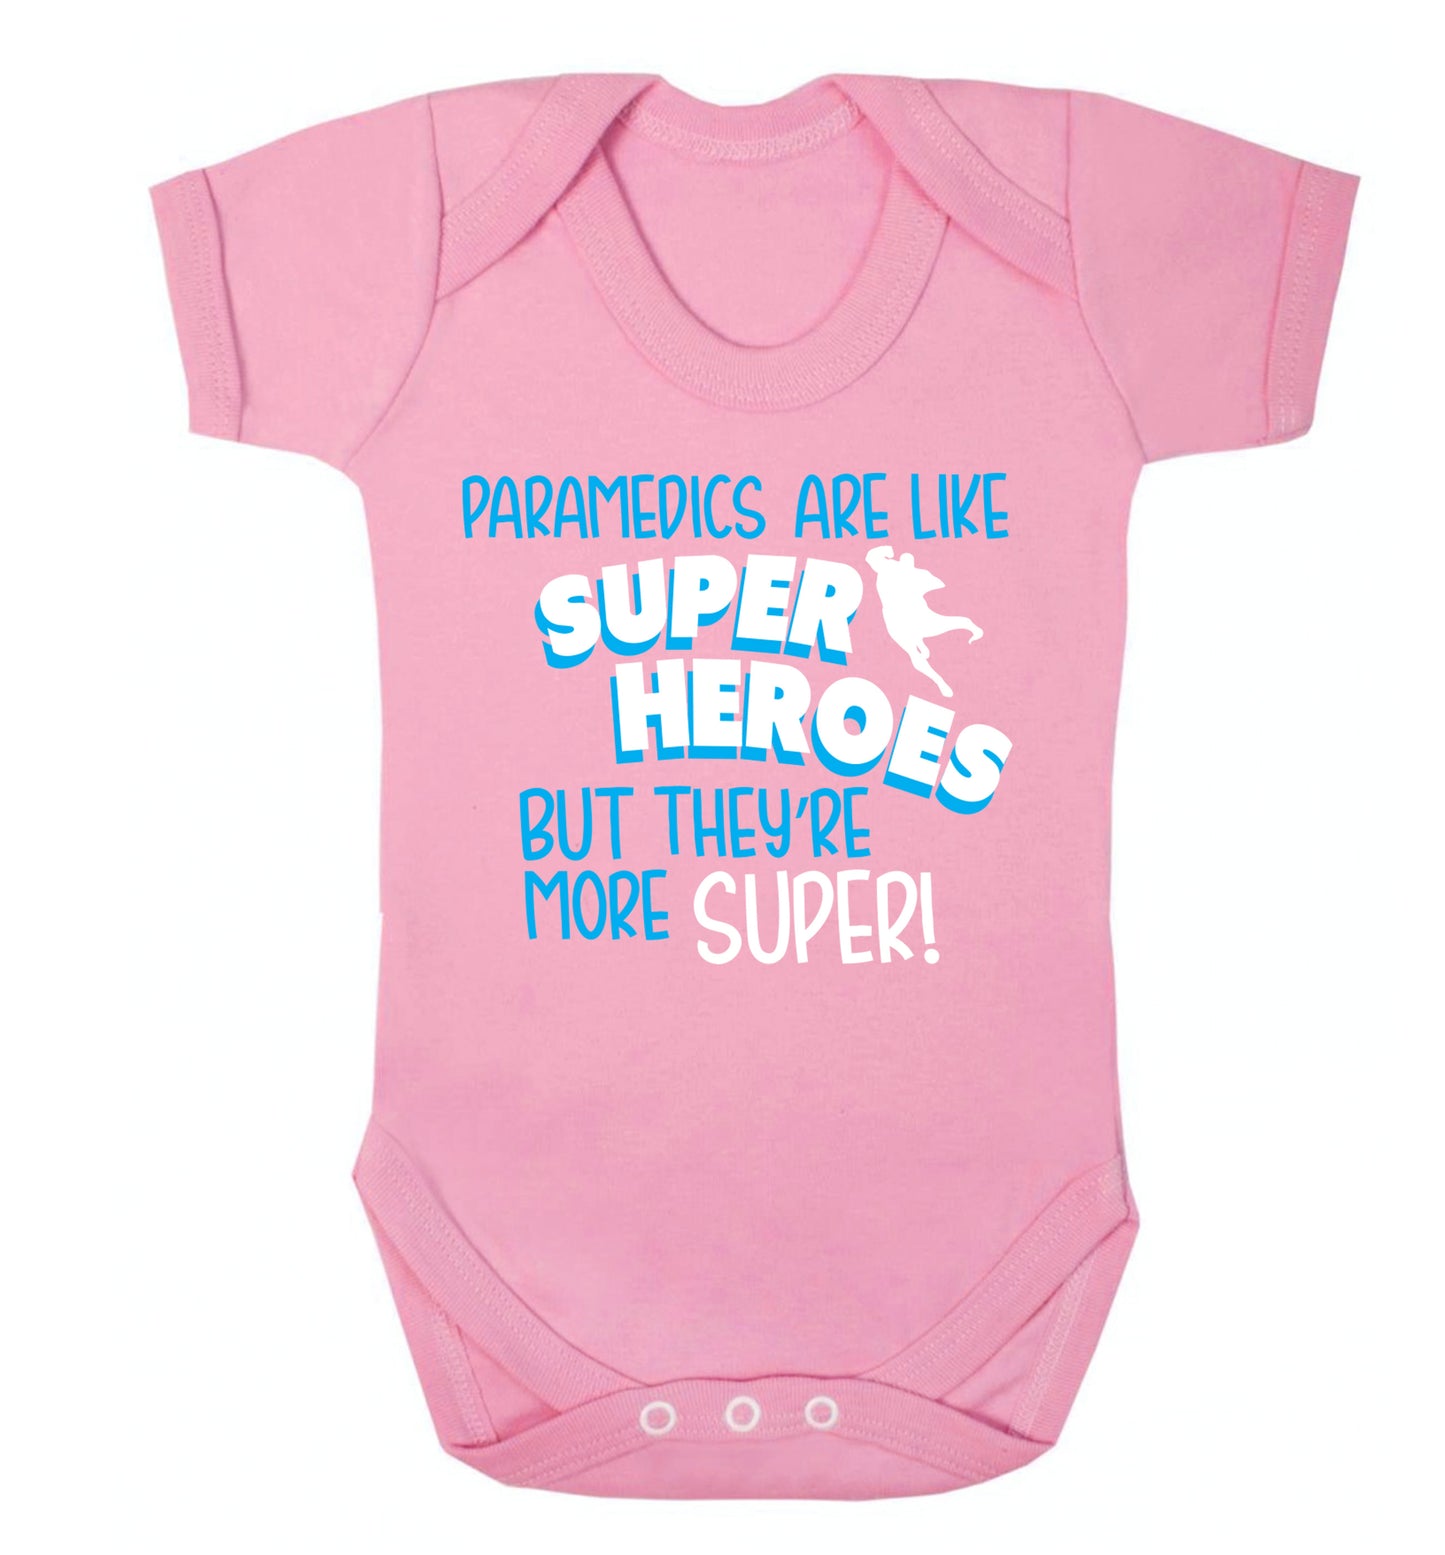 Paramedics are like superheros but they're more super Baby Vest pale pink 18-24 months